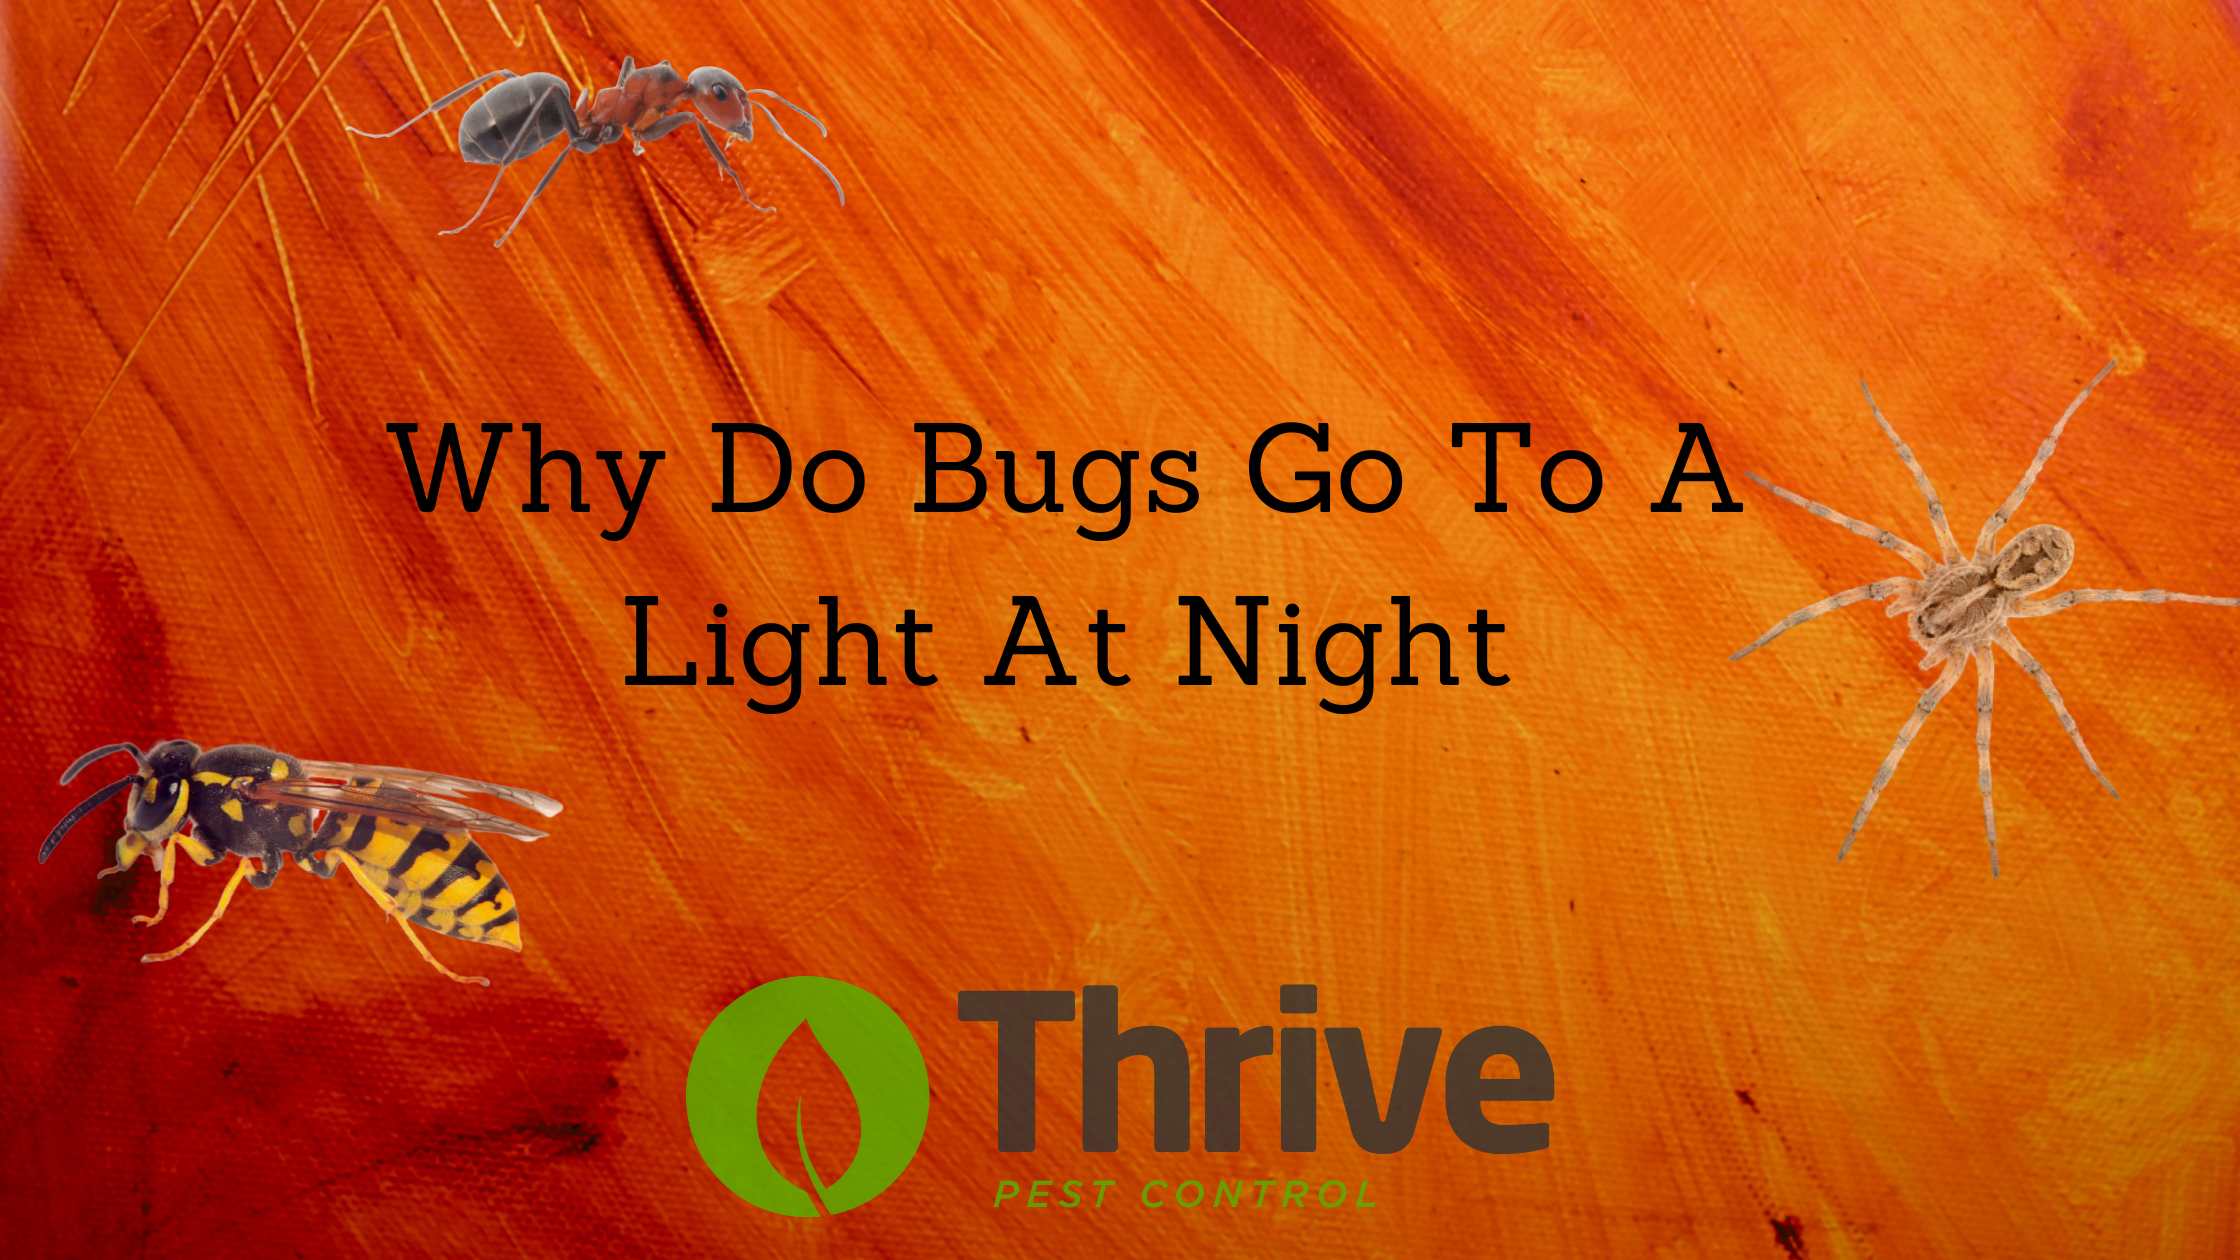 Why Do Bugs Go To A Light At Night